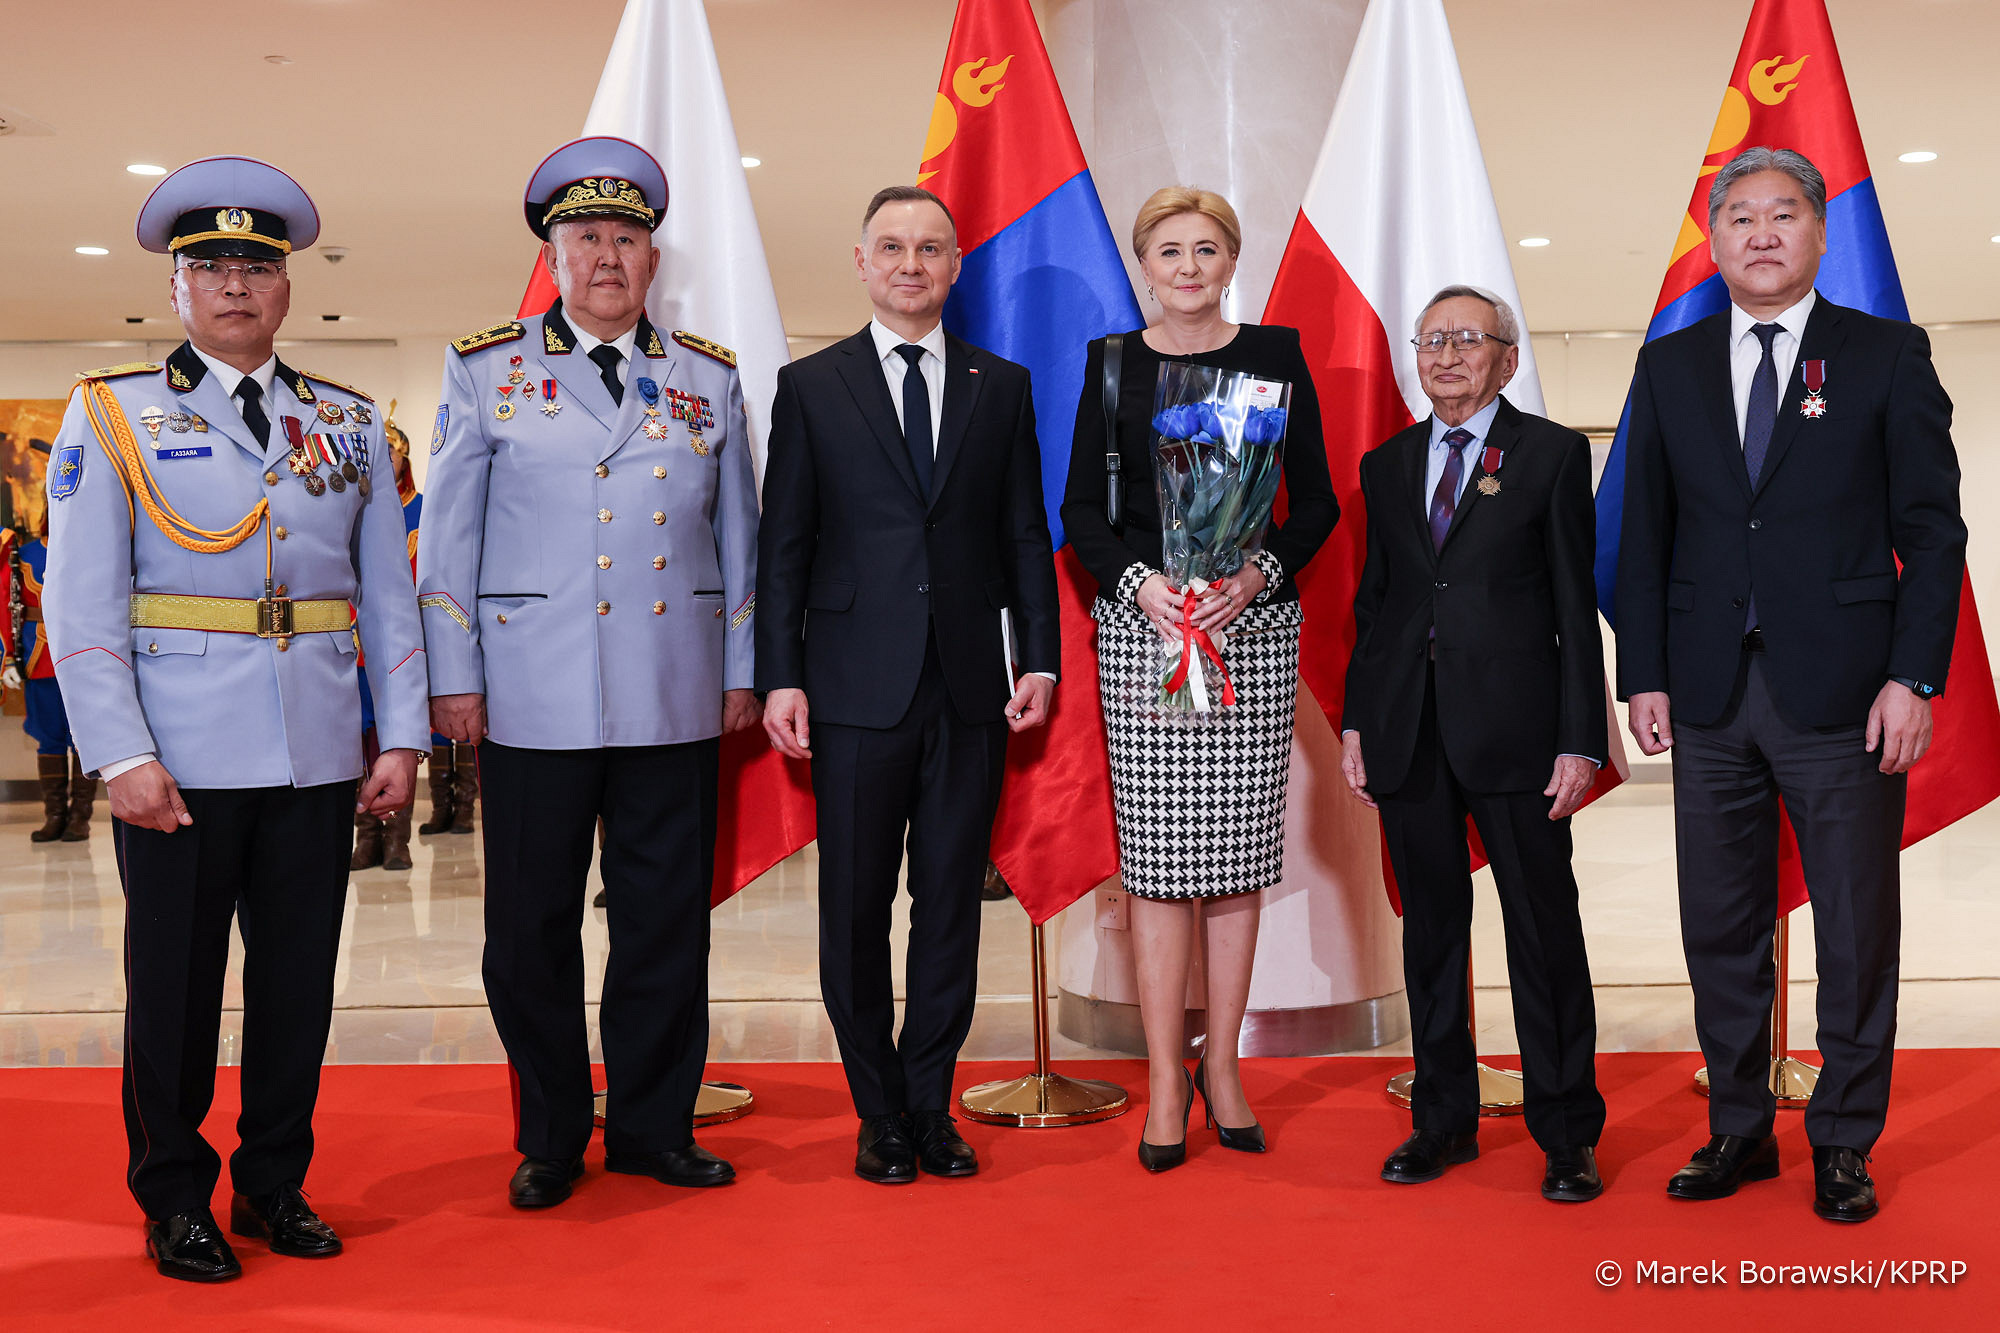 Official visit of the Presidential Couple to Mongolia. Mrs Agata Kornhauser-Duda again styled by Atelier De Marco